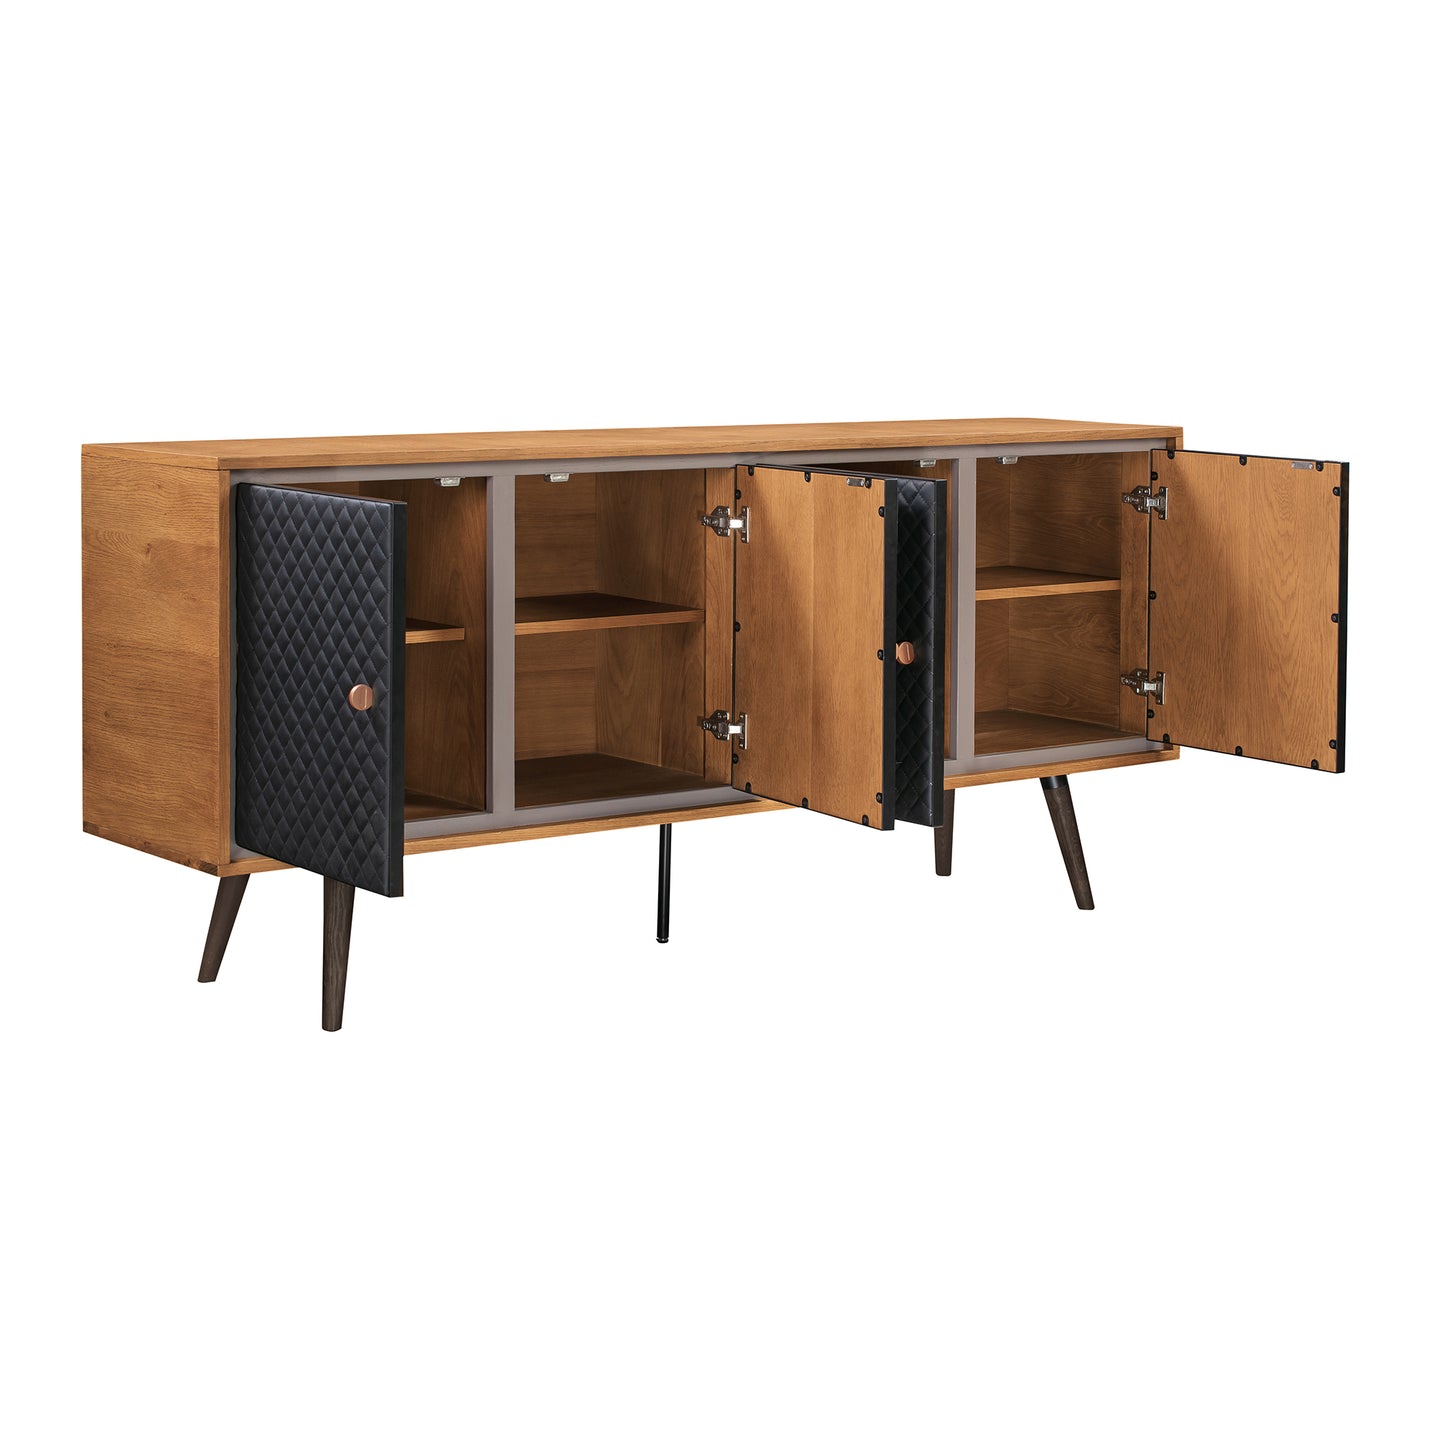 Coco Rustic 2 piece set with Dining Table and Sideboard in Balsamico